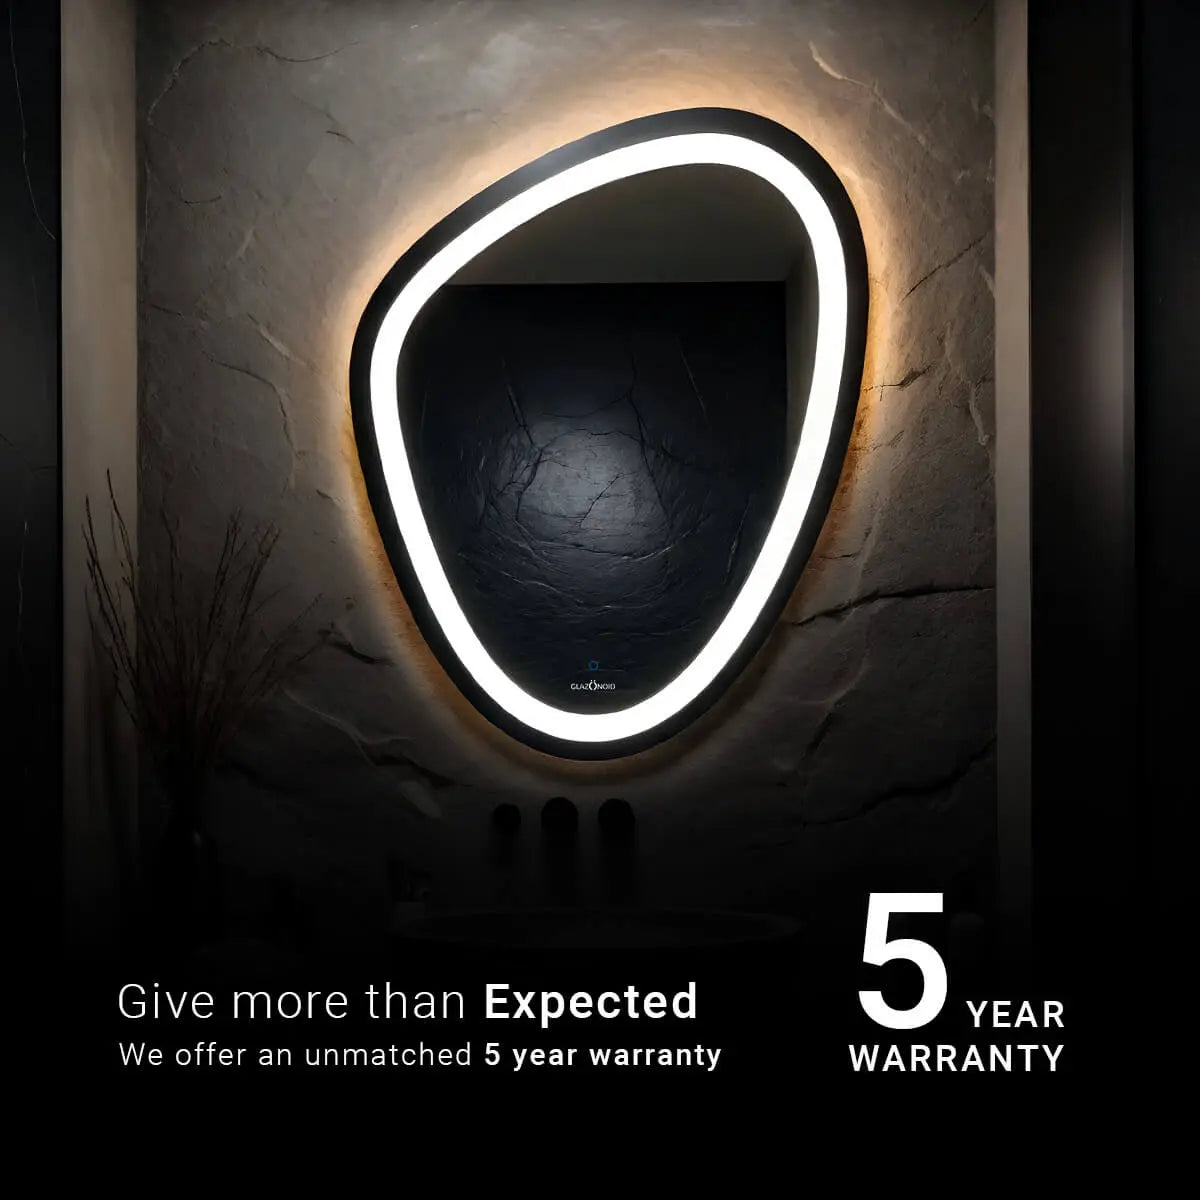 A pebble shaped bathroom mirror with a LED strip light. The text overlay reads 5 year warranty that is being offered by the brand for the products.